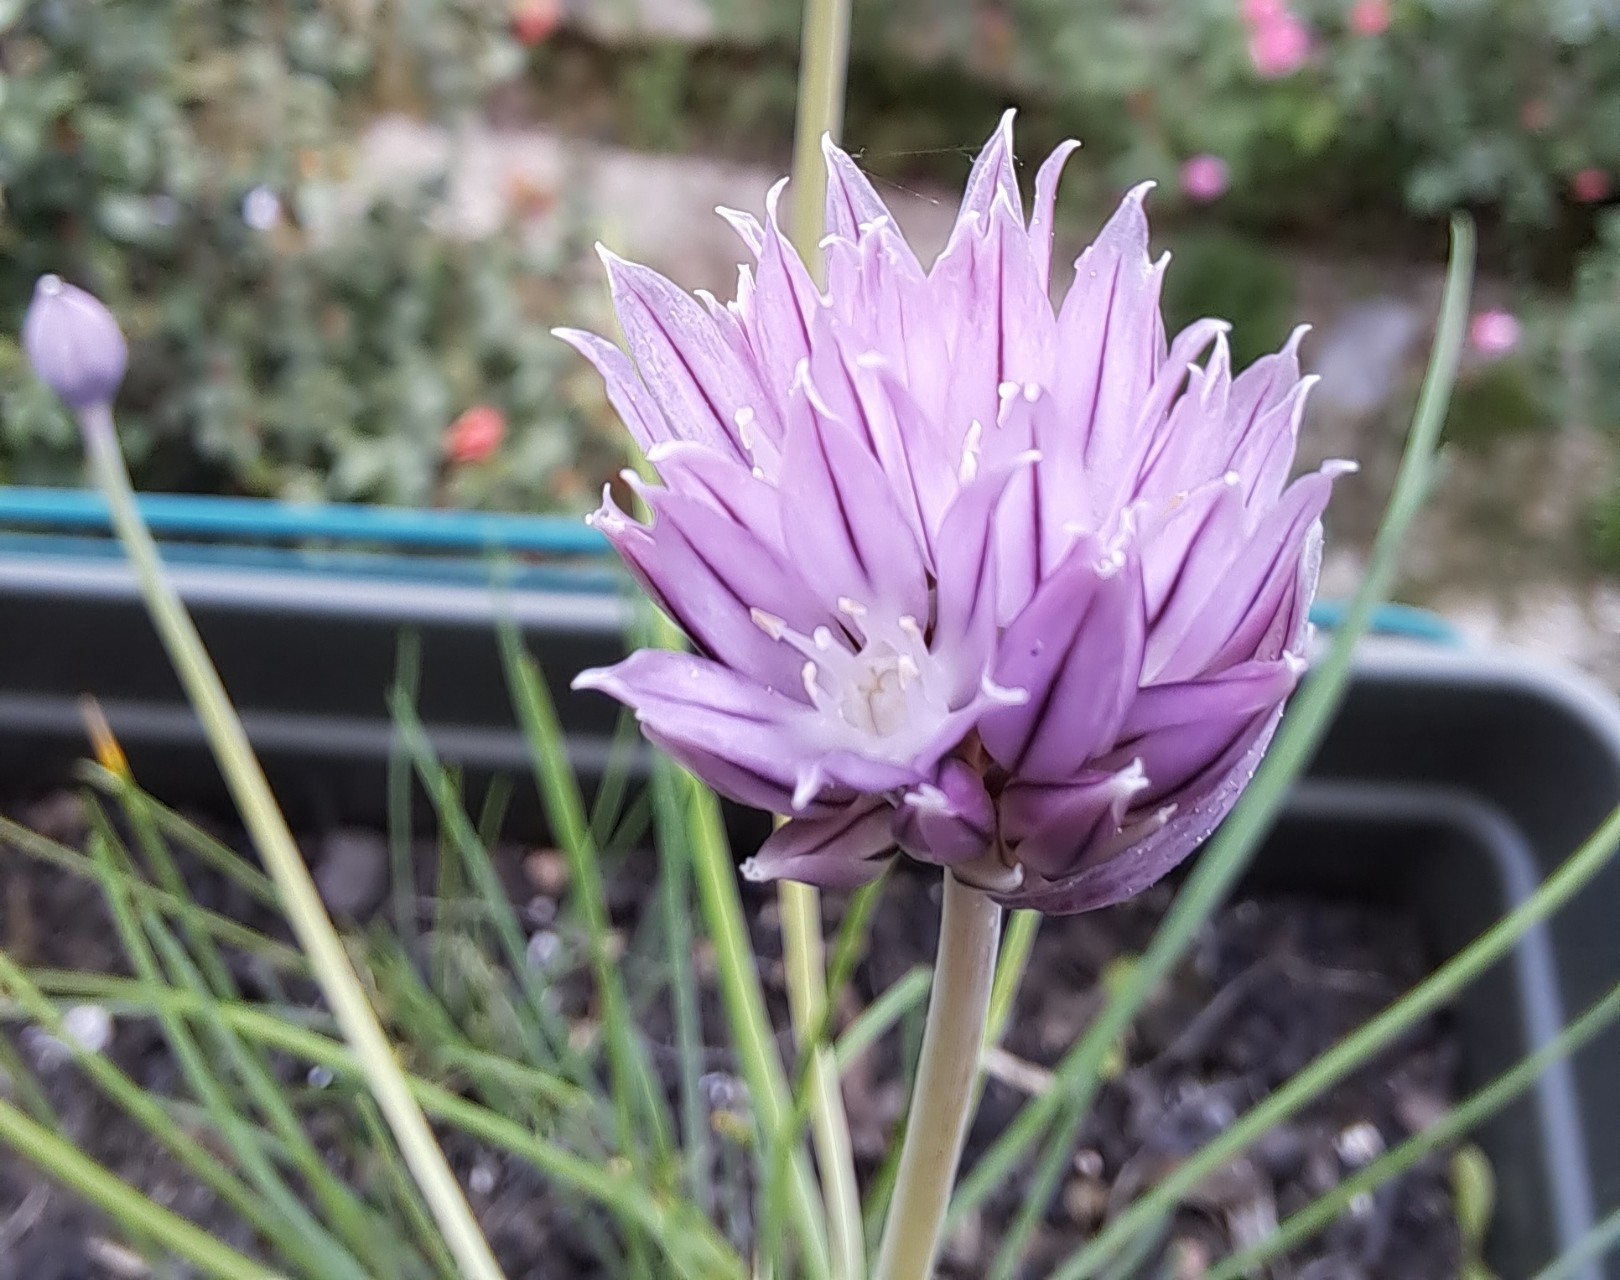 A flower pot with chives blooming: purple flower